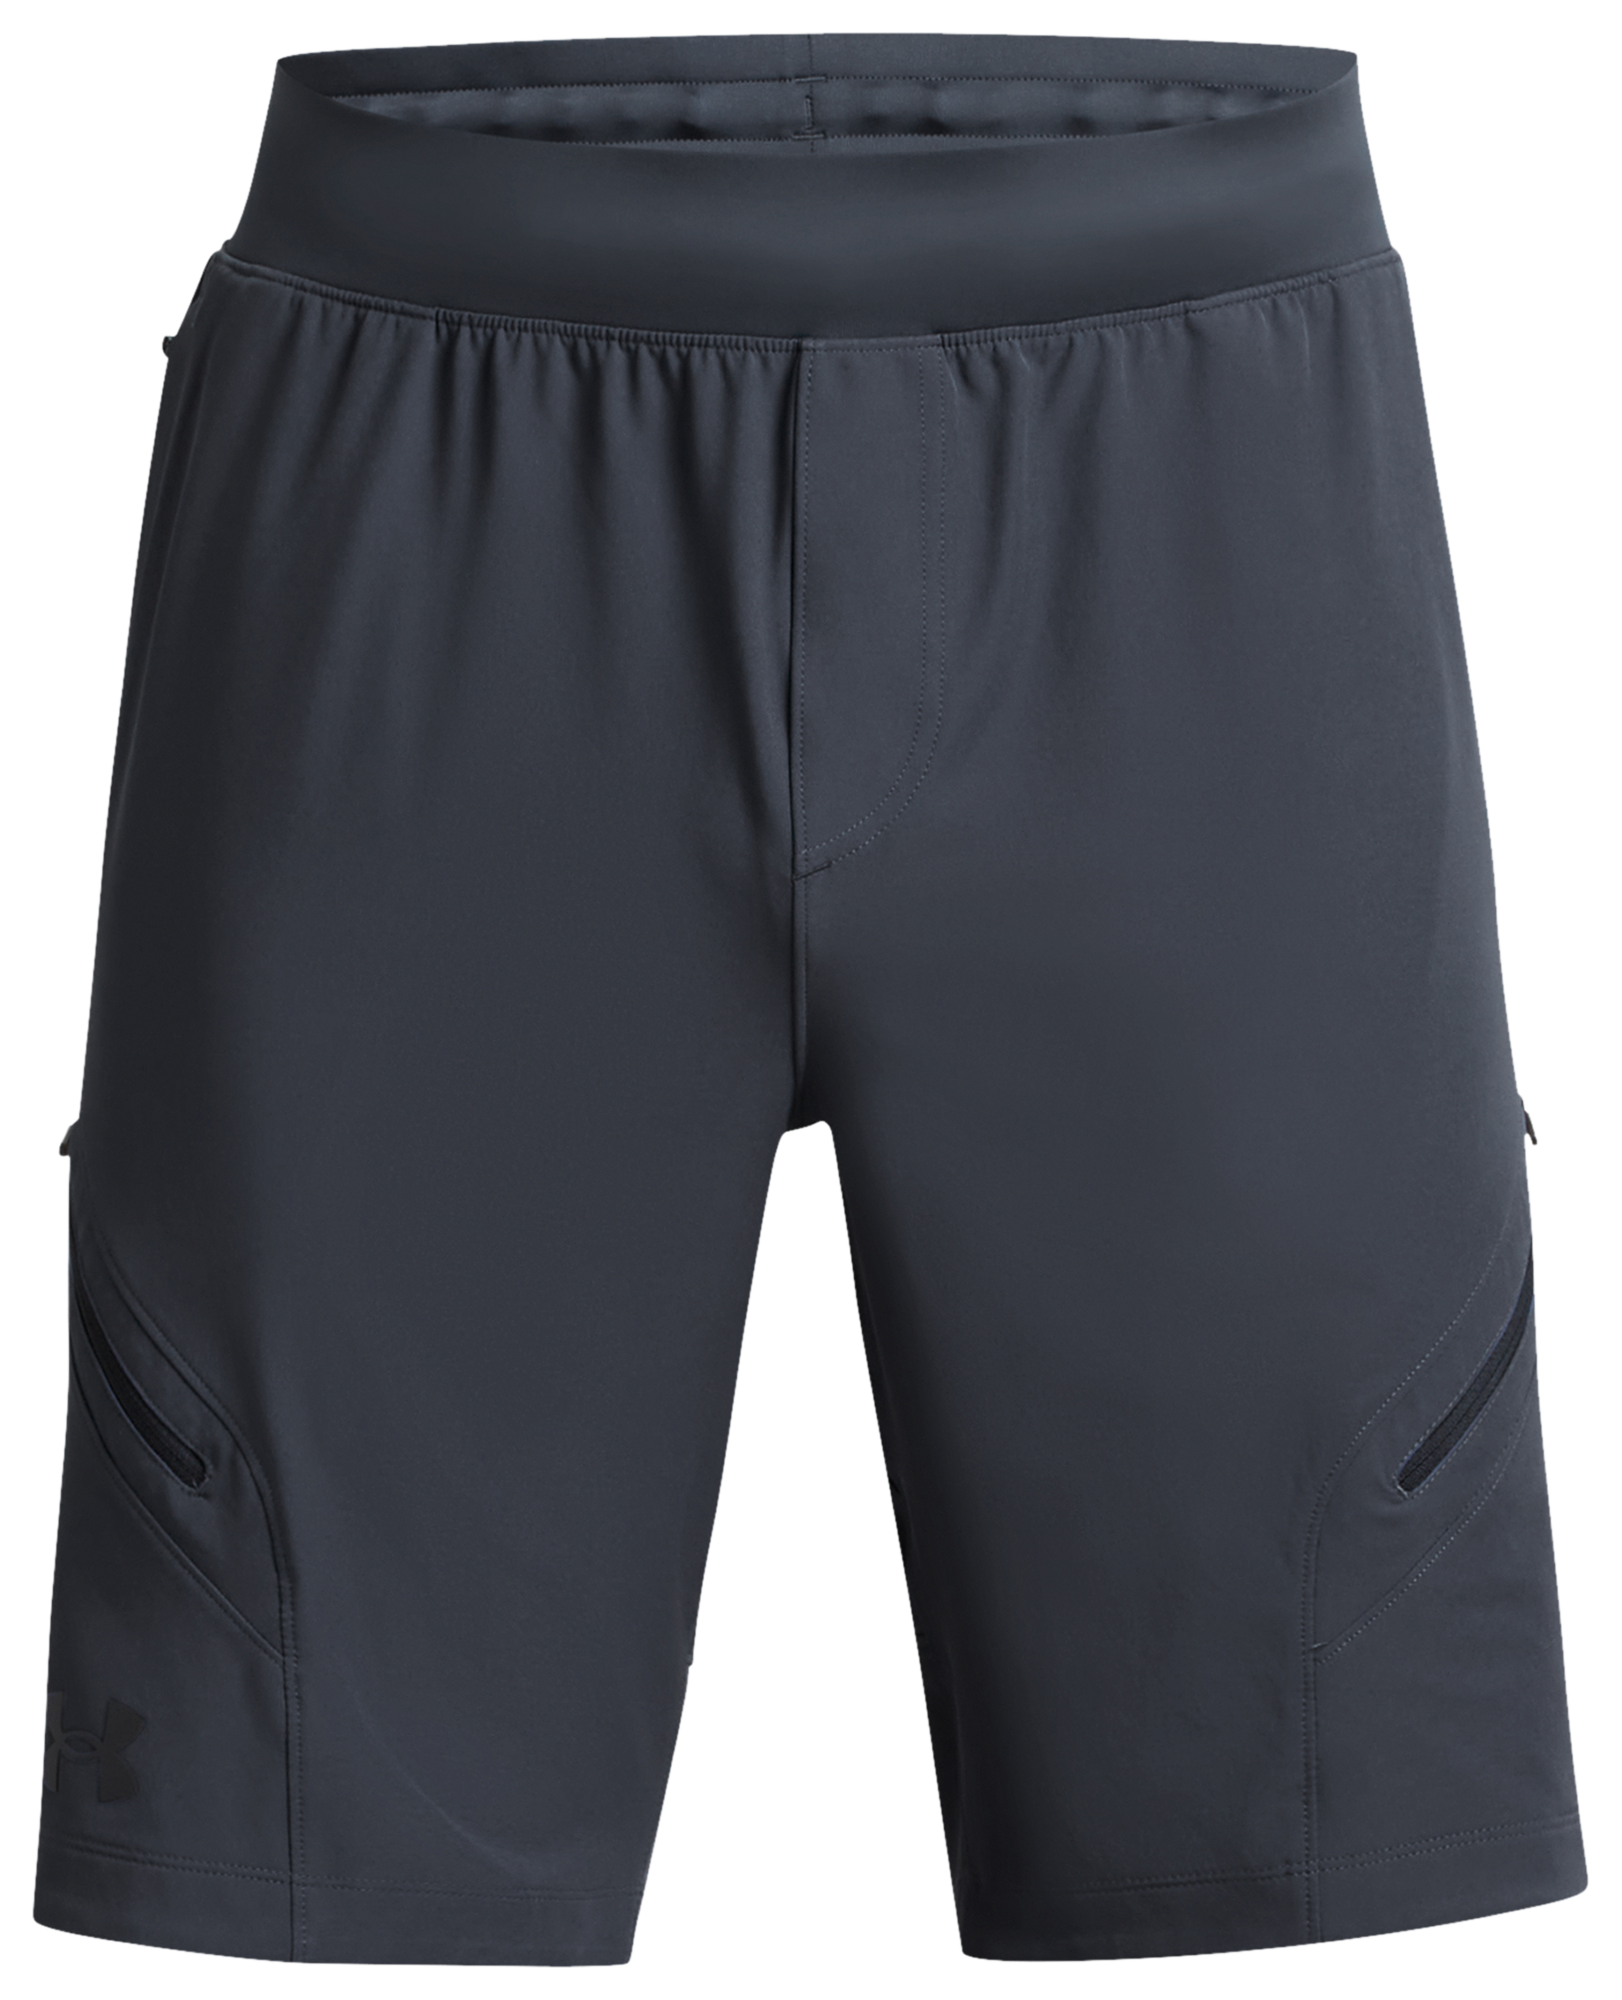 Under Armour Unstoppable cargo shorts in dark grey